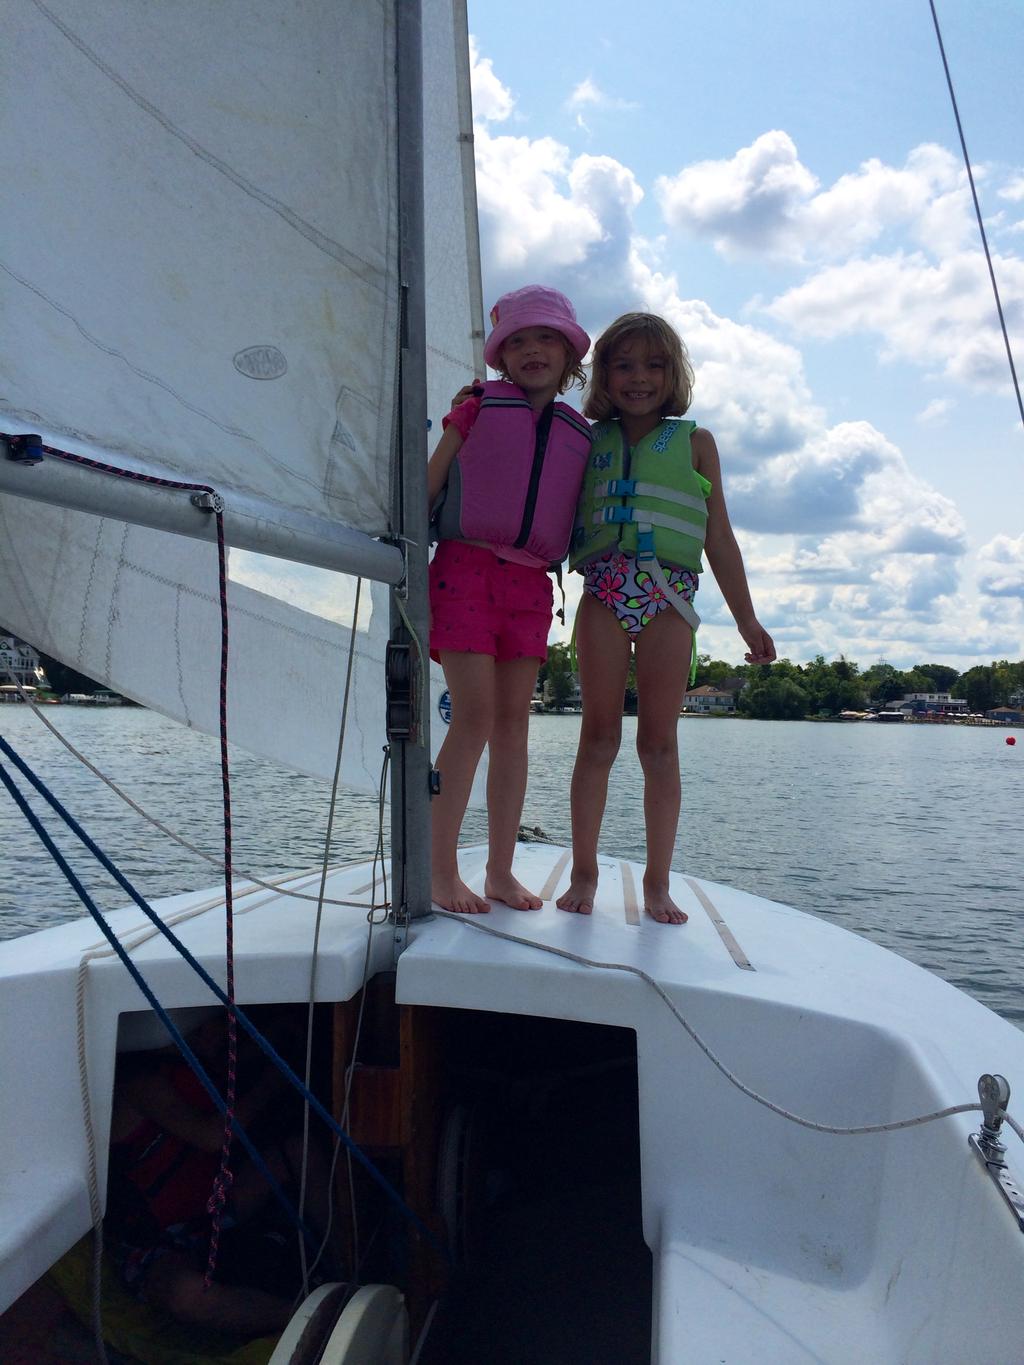 Beginning Sailing Classes The Beginning Opti Program at PLSS will teach your sailor everything they need to know about navigating their opti around Pewaukee Lake on their own, including the